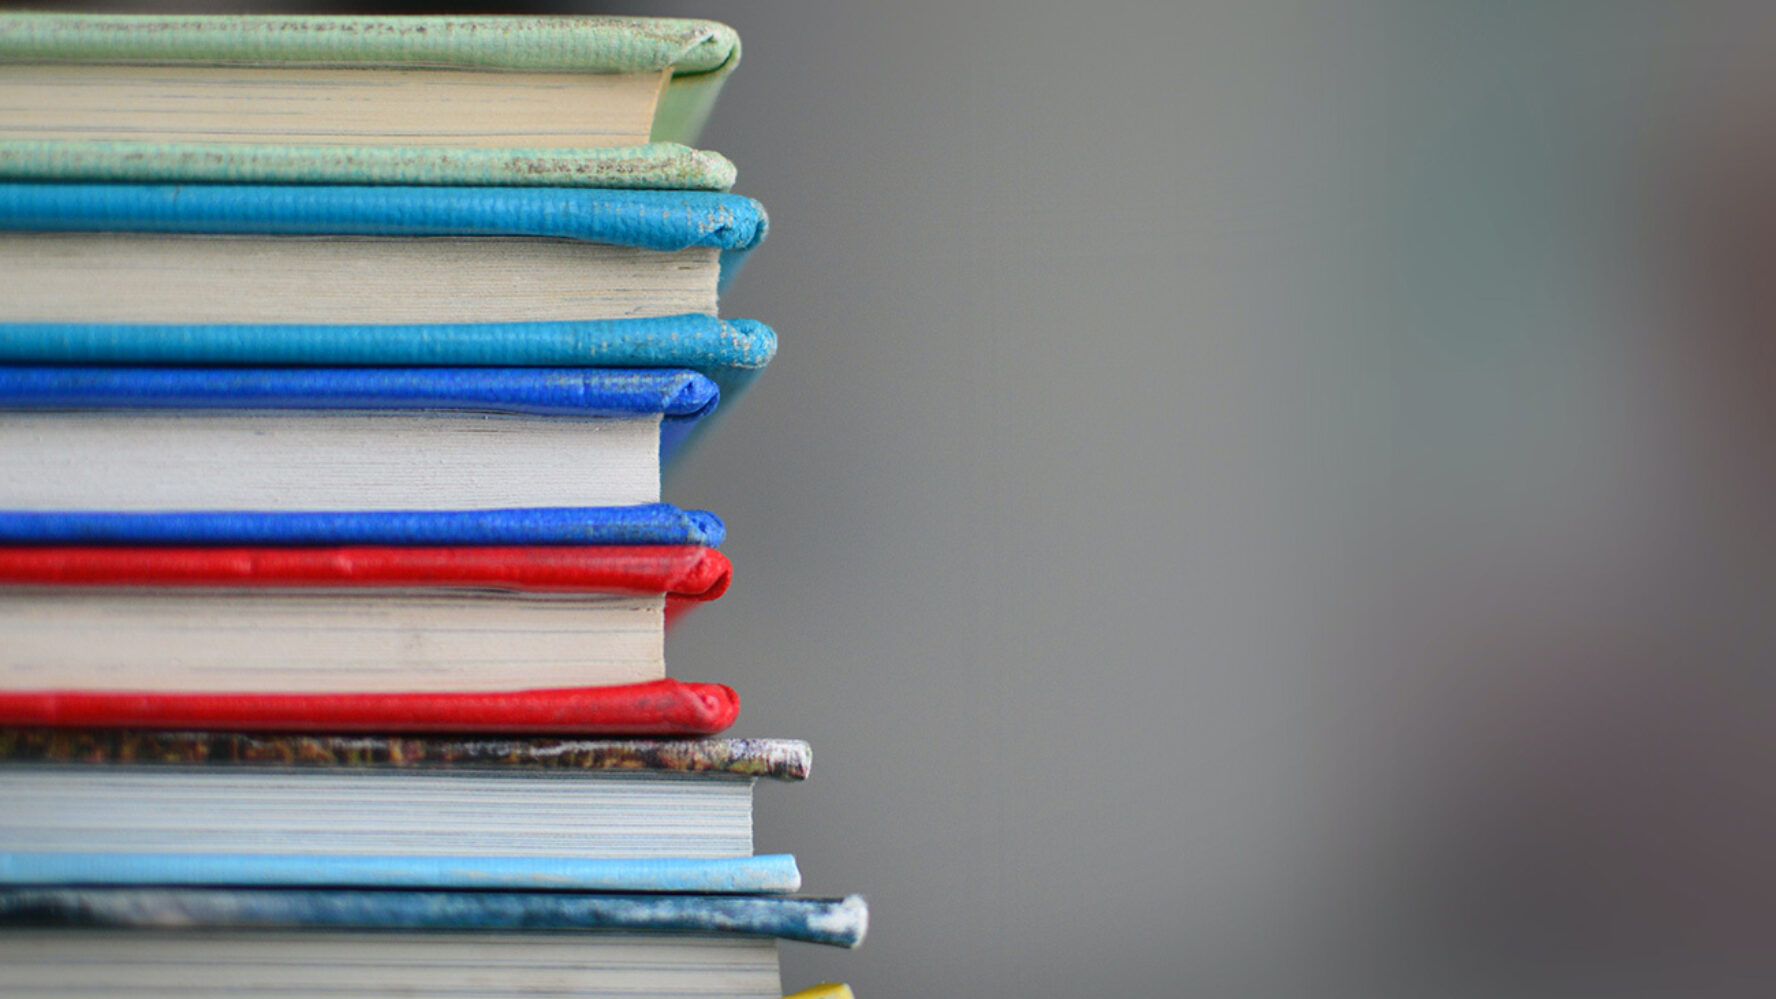 A stack of schoolbooks; the spines show a range of colours